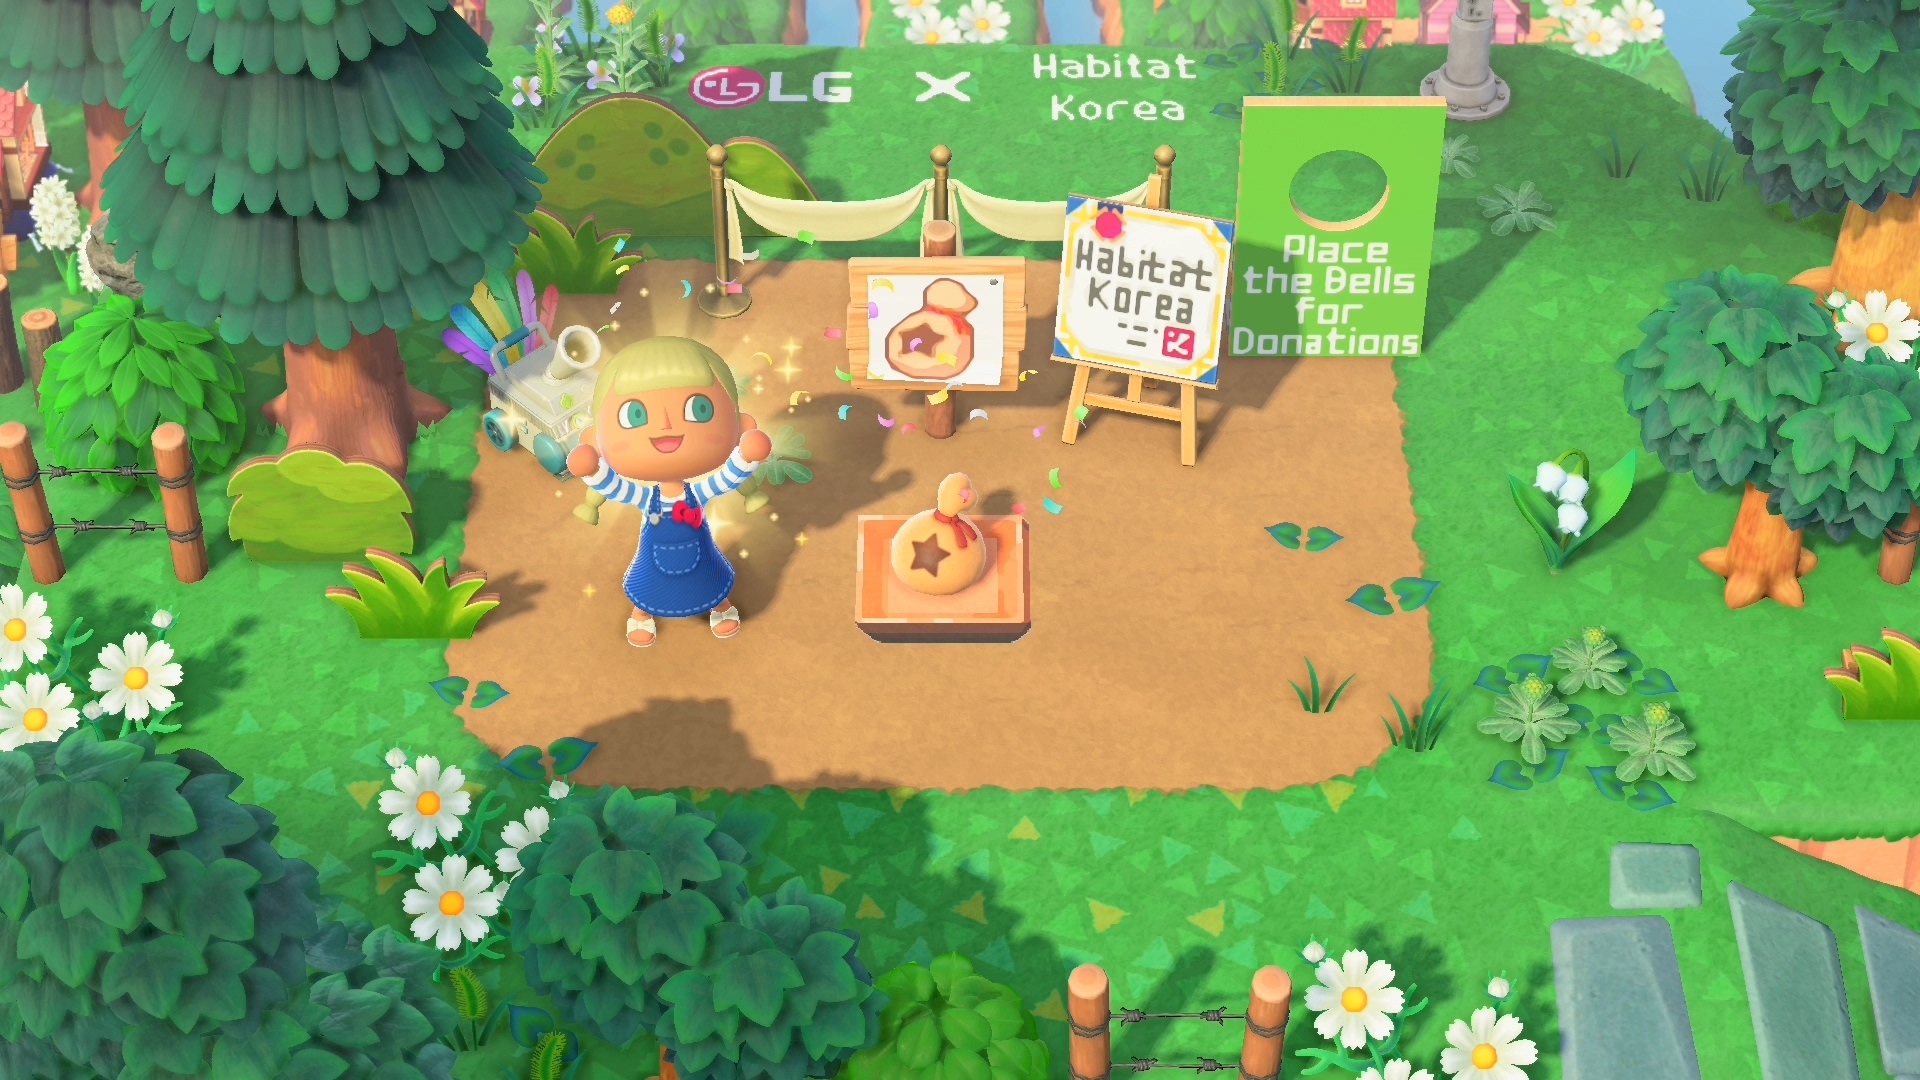 A player character in the game 'Animal Crossing' strikes a pose at the Habitat Korea Zone of LG Home Island